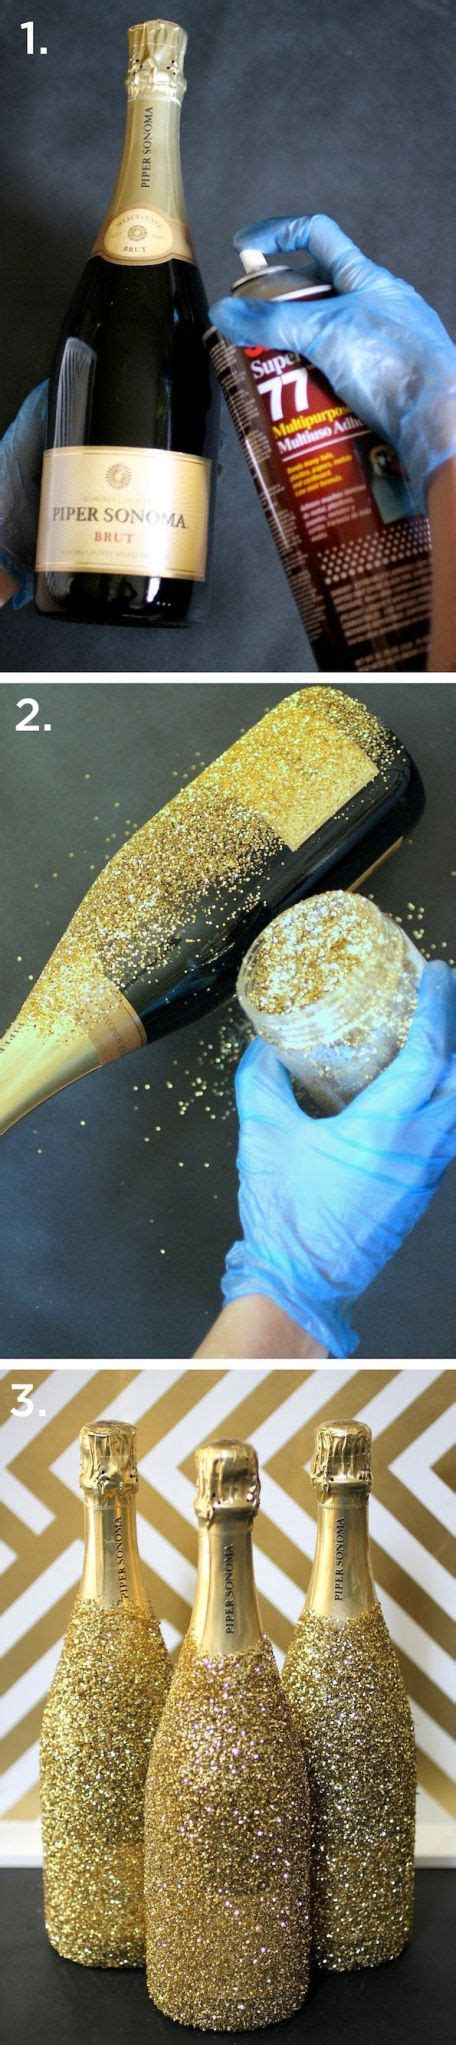 Glittered Wine Bottles Do It And How